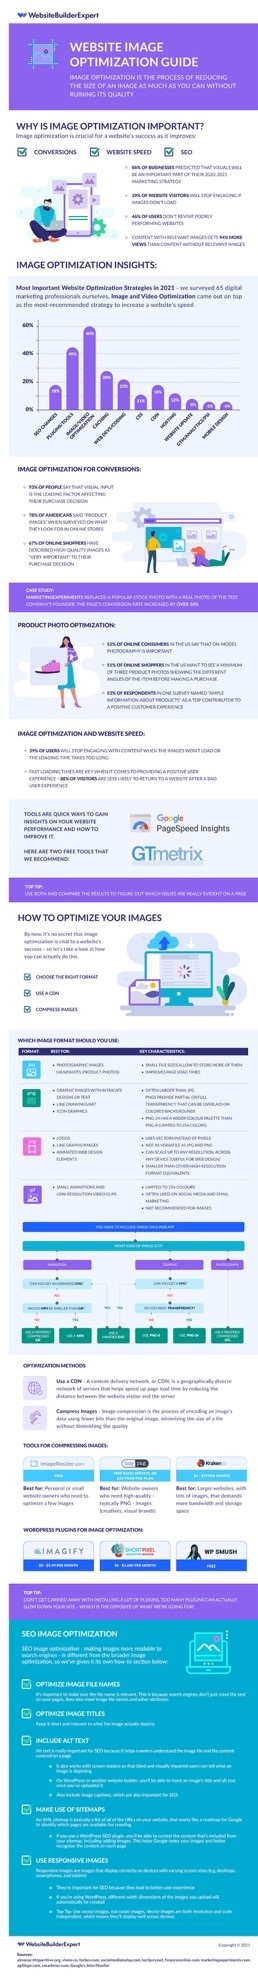 Body - Why Image Optimization Matters Conversions, Speed & SEO